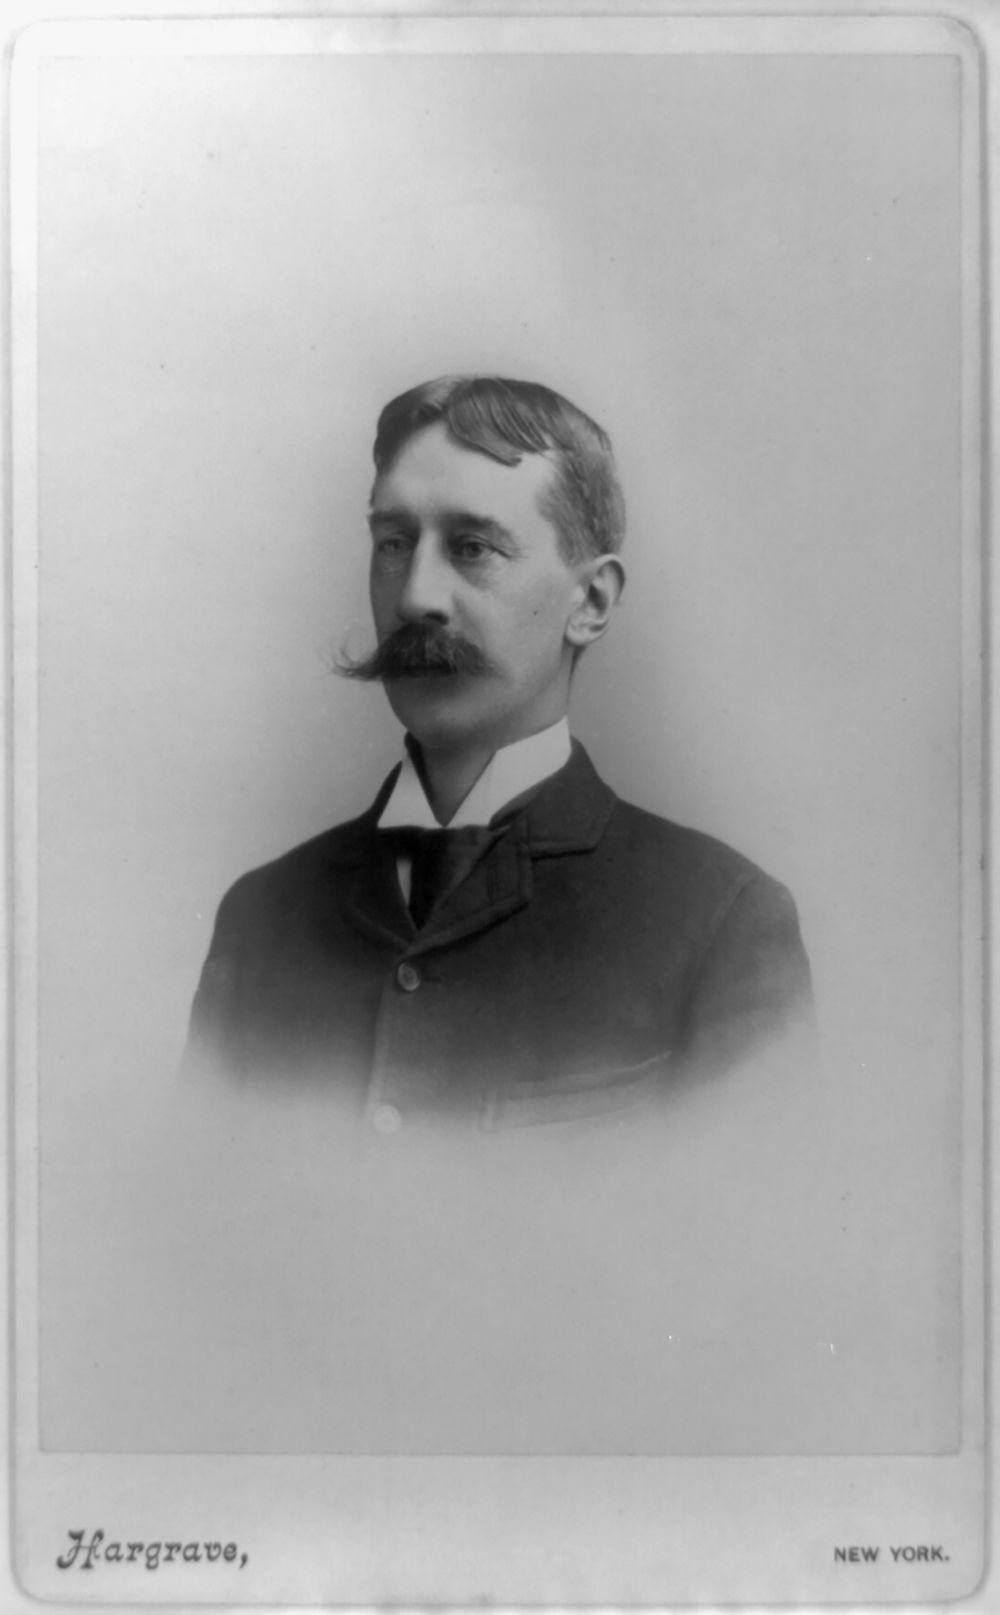 Portrait of George Bird Grinnell ca. 1899 courtesy of the Library of Congress.
